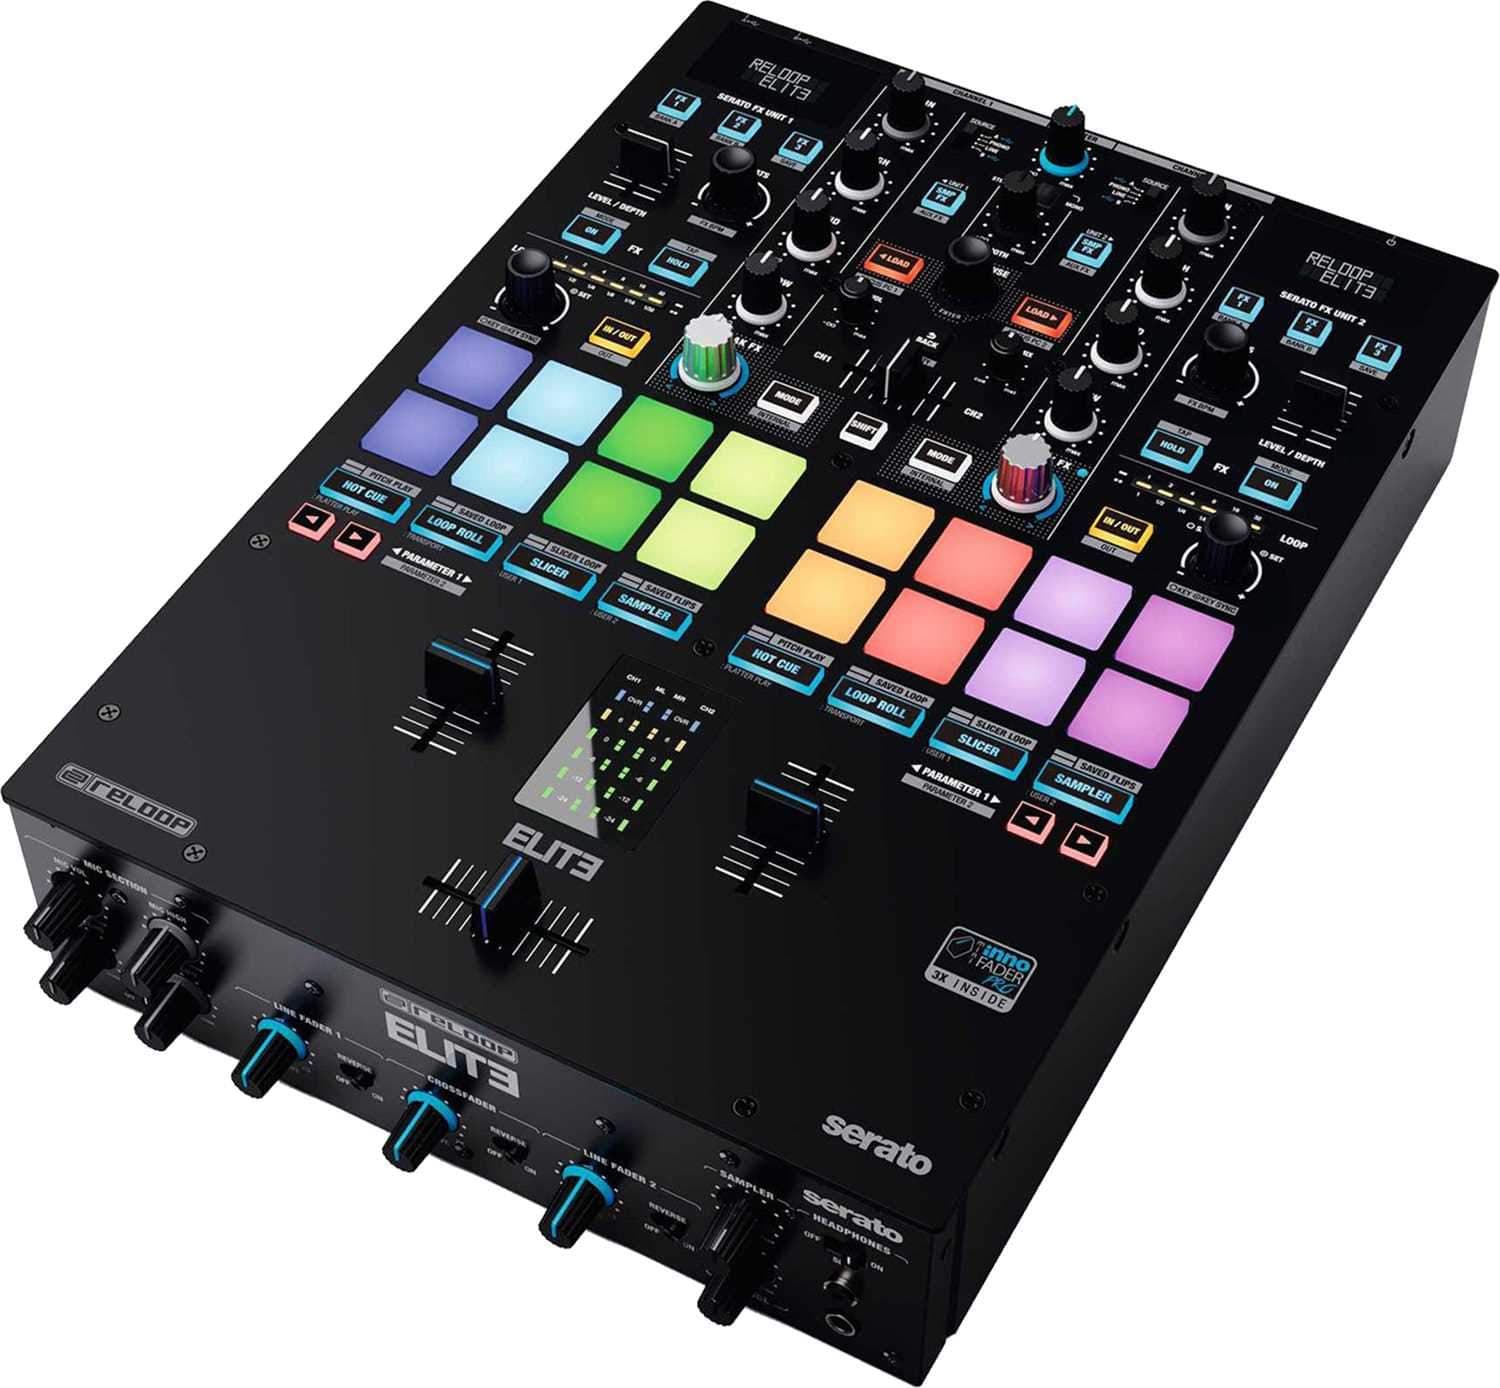 Reloop Elite DJ Mixer with RP-8000 MK2 Turntable - ProSound and Stage Lighting